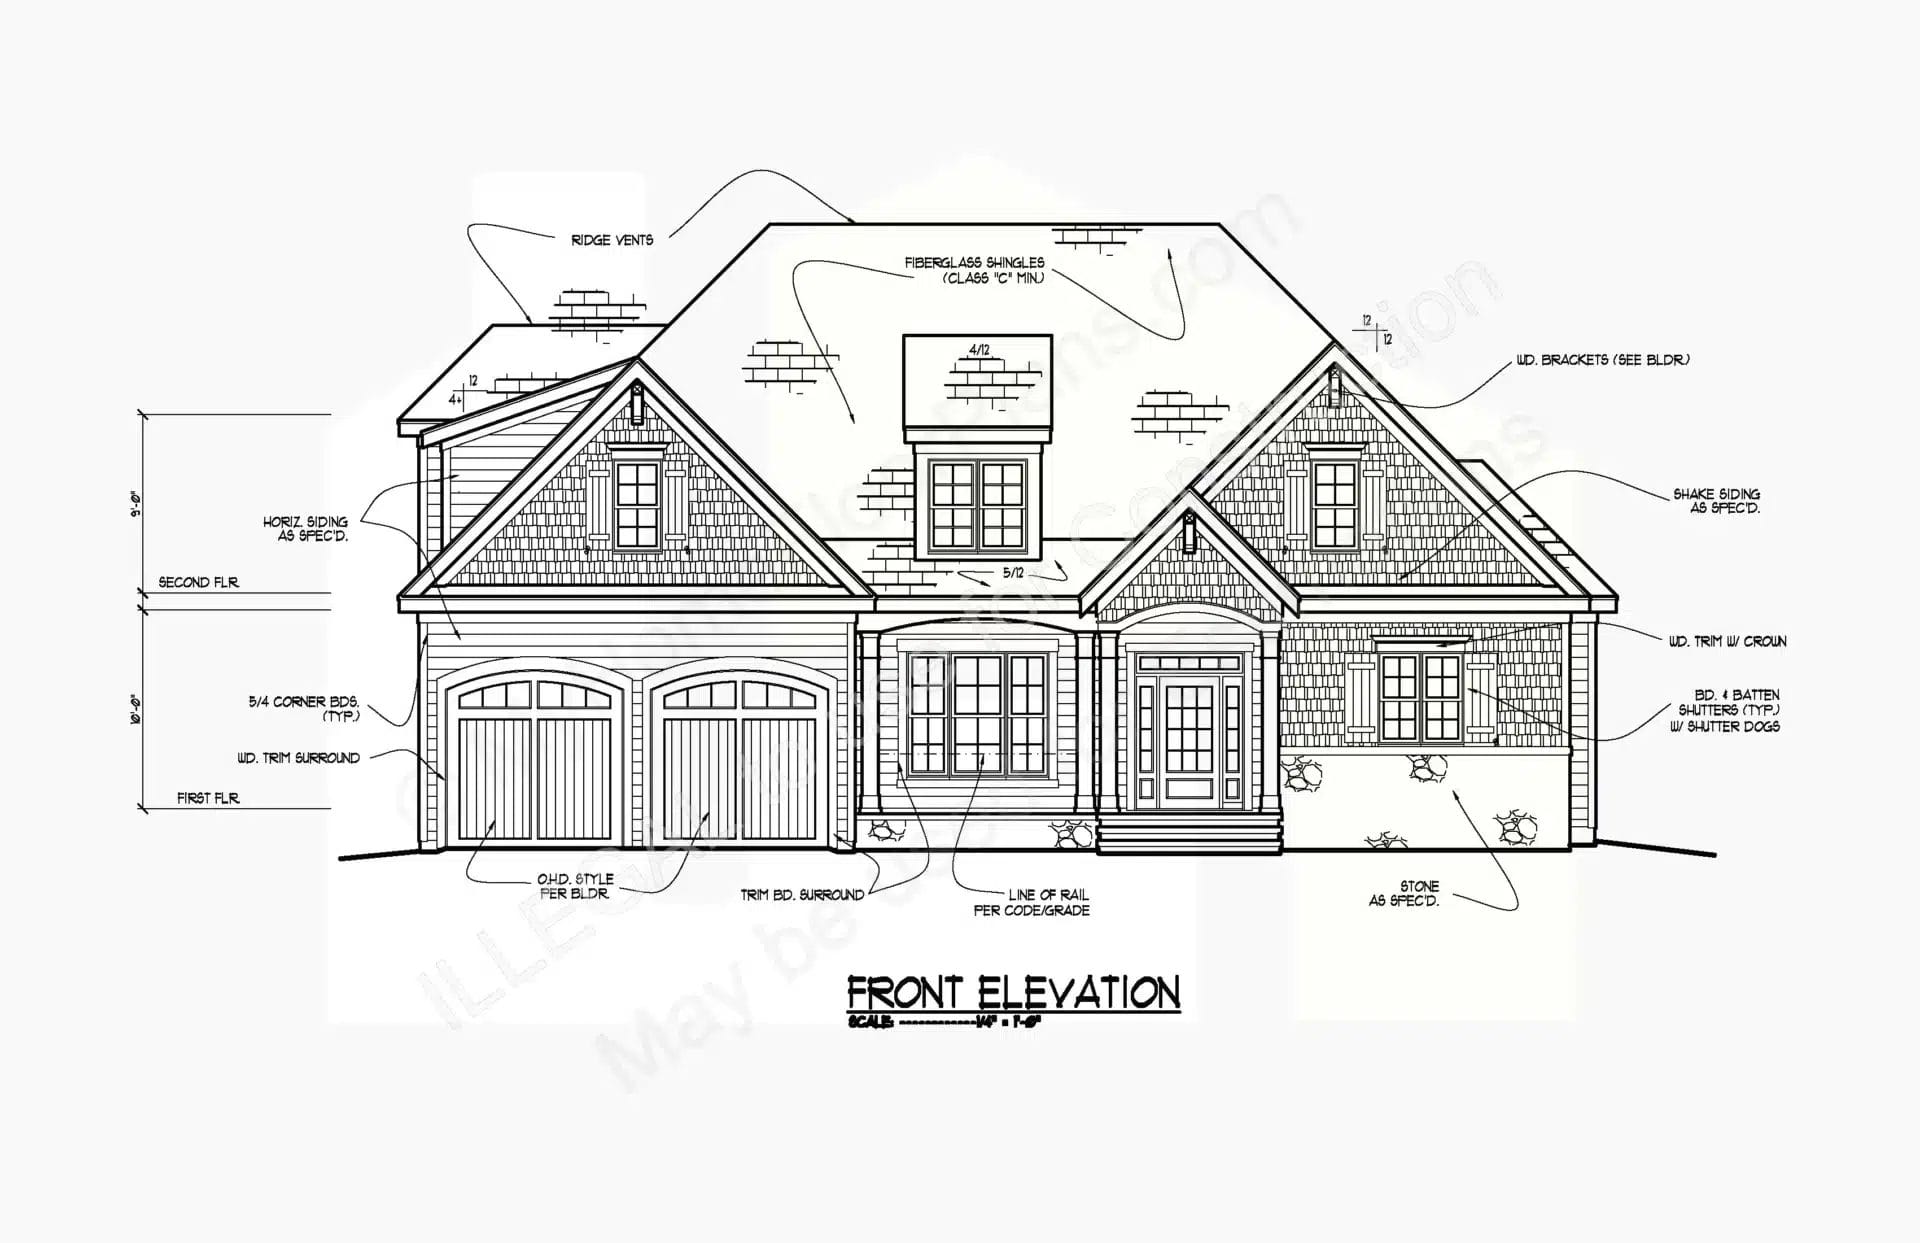 Front elevation plan of a two-story traditional home featuring a three-car garage, multiple gabled roofs, dormer windows, and detailed facade elements, labeled with dimensions and material specifications of the 13-1214.